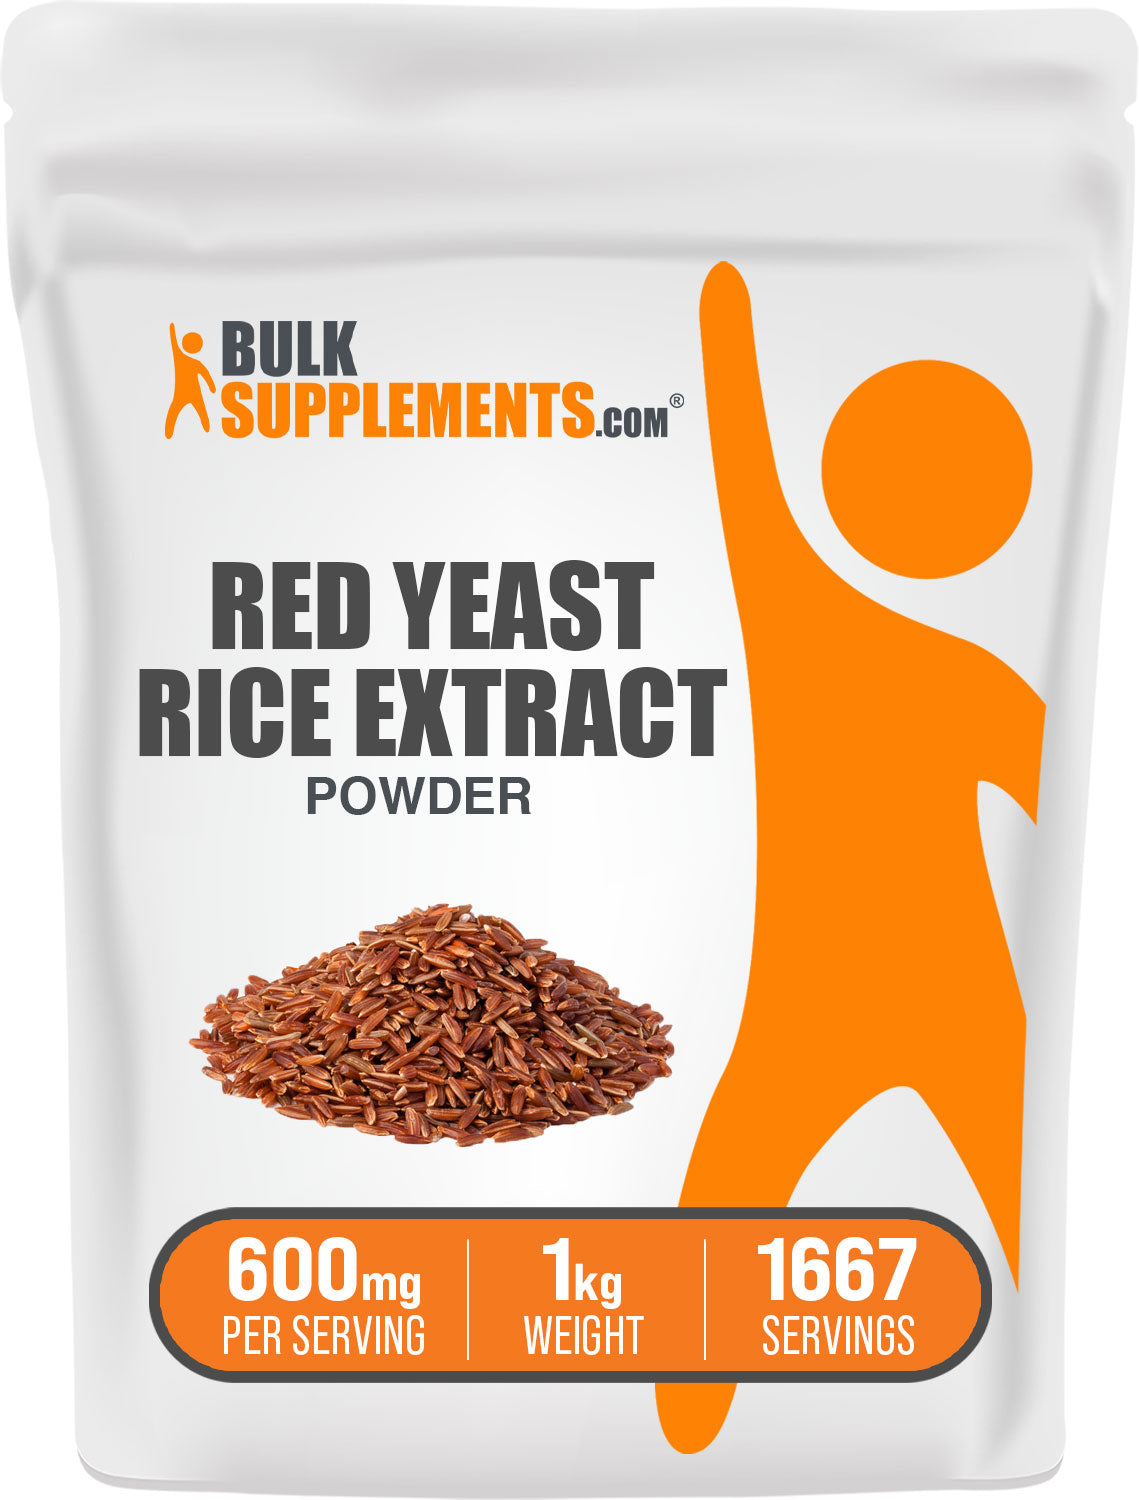 BulkSupplements Red Yeast Rice Extract Powder 1kg bag